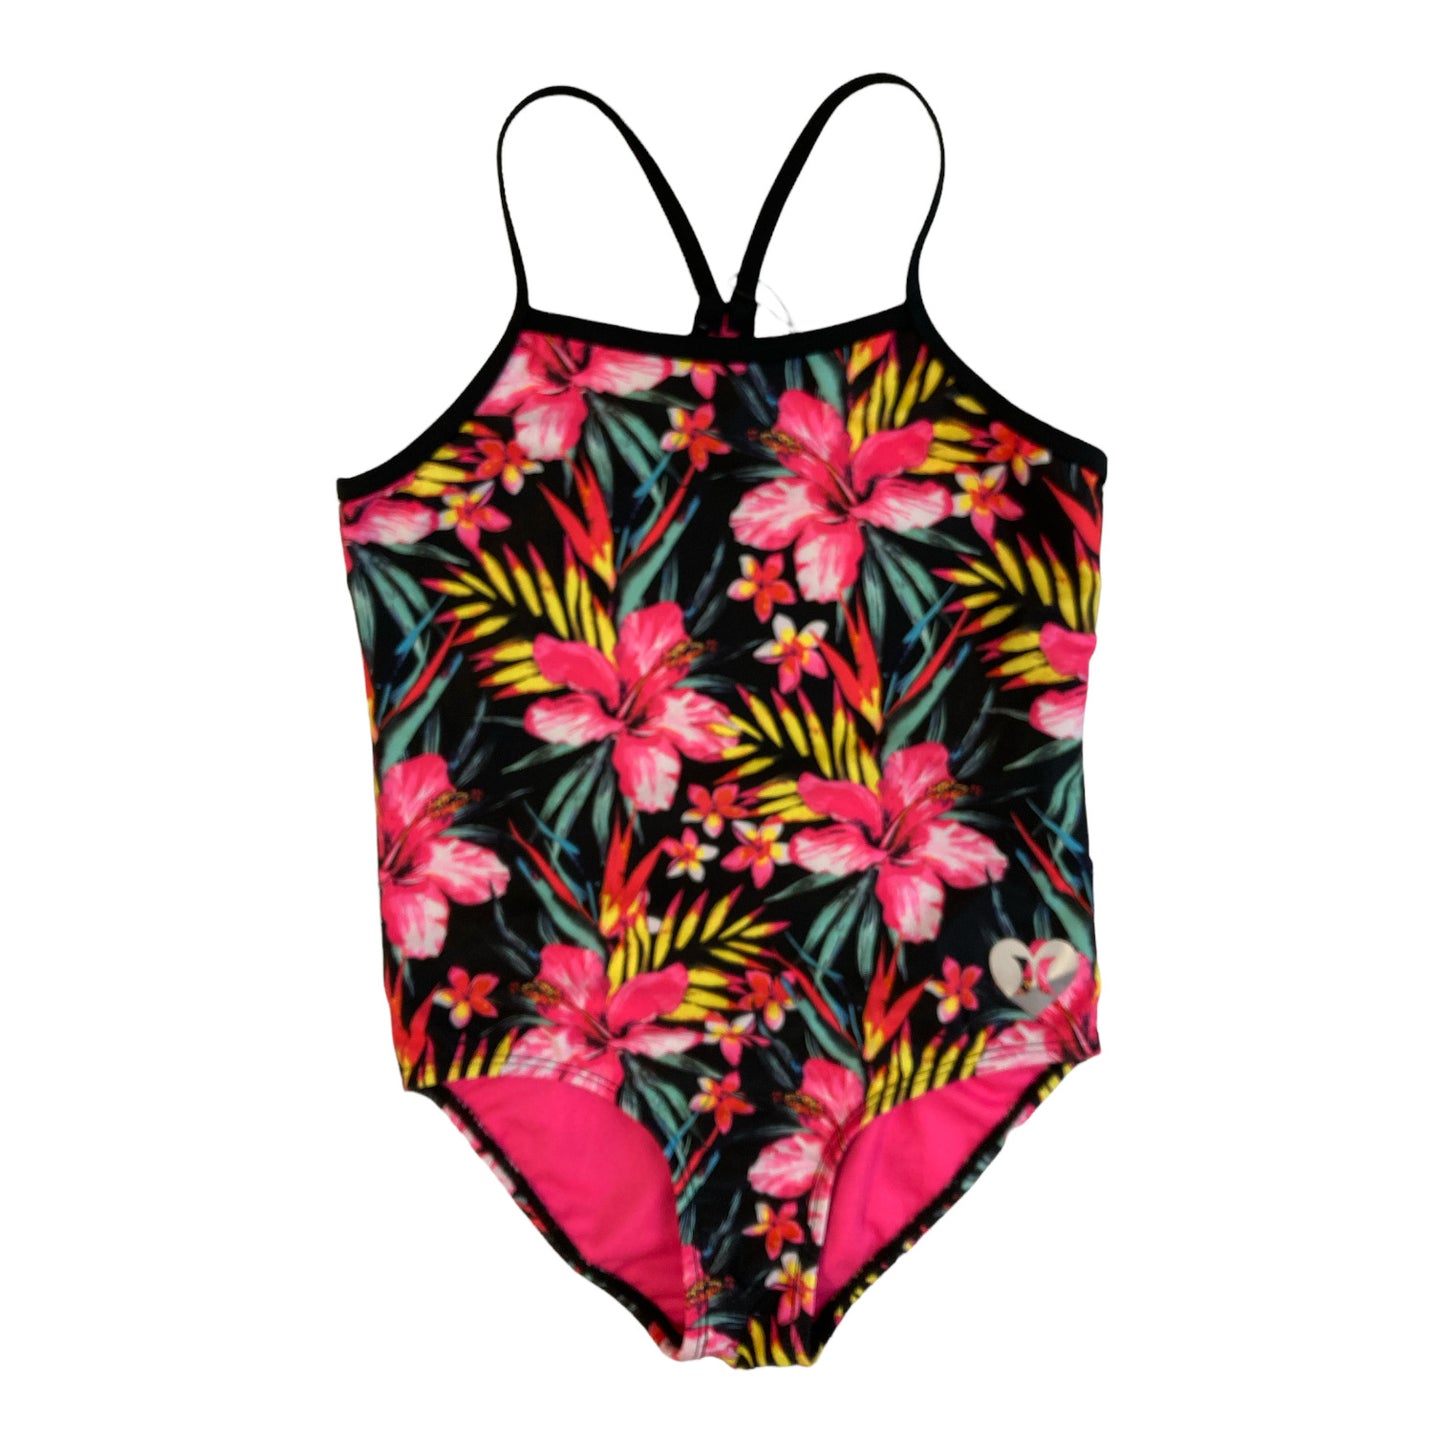 Hurley Girl's UPF 50+ One-Piece Quick Dry Swimsuit